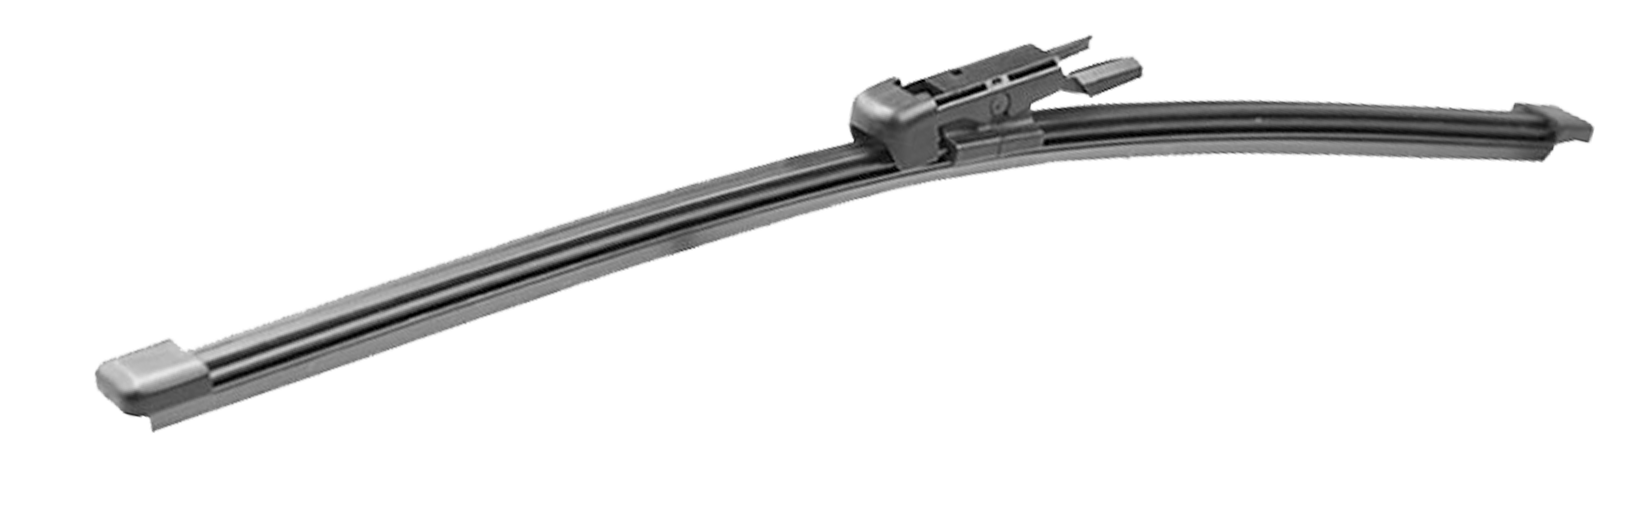 Rear Wiper Blade for Mercedes-AMG A45 2015-2017 (W176 Facelift) 